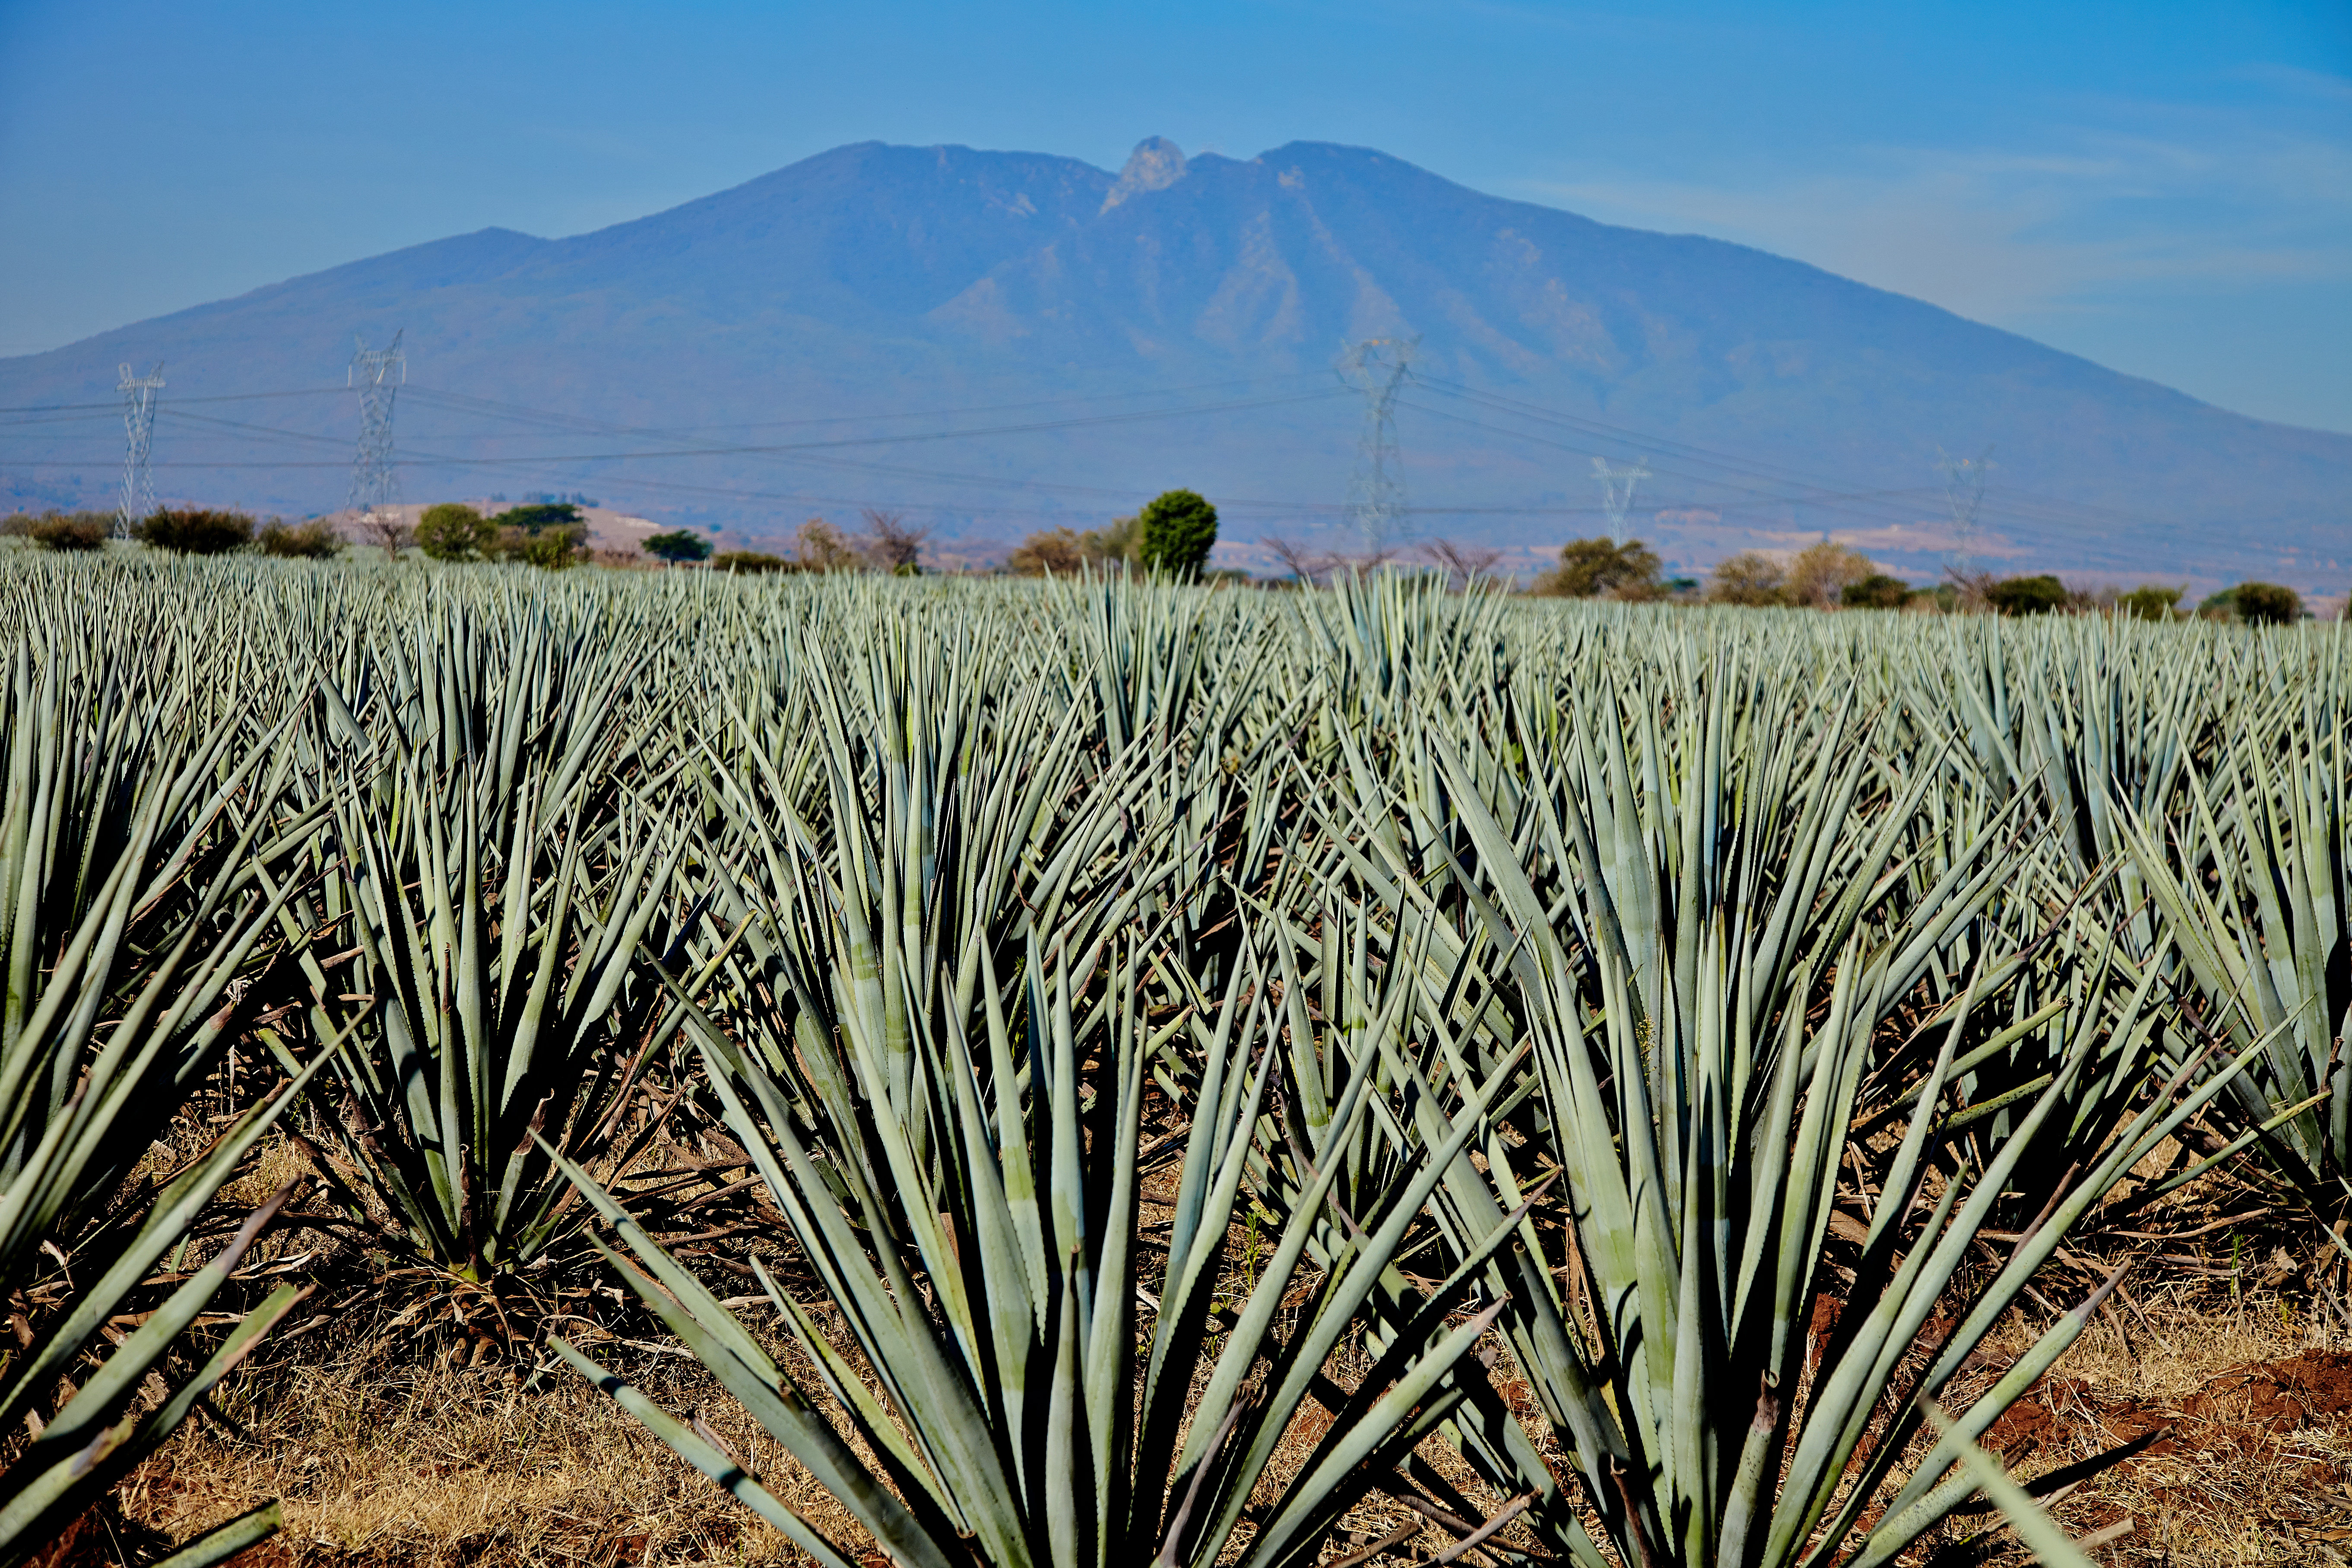 Experience the heart of Tequila, Jalisco